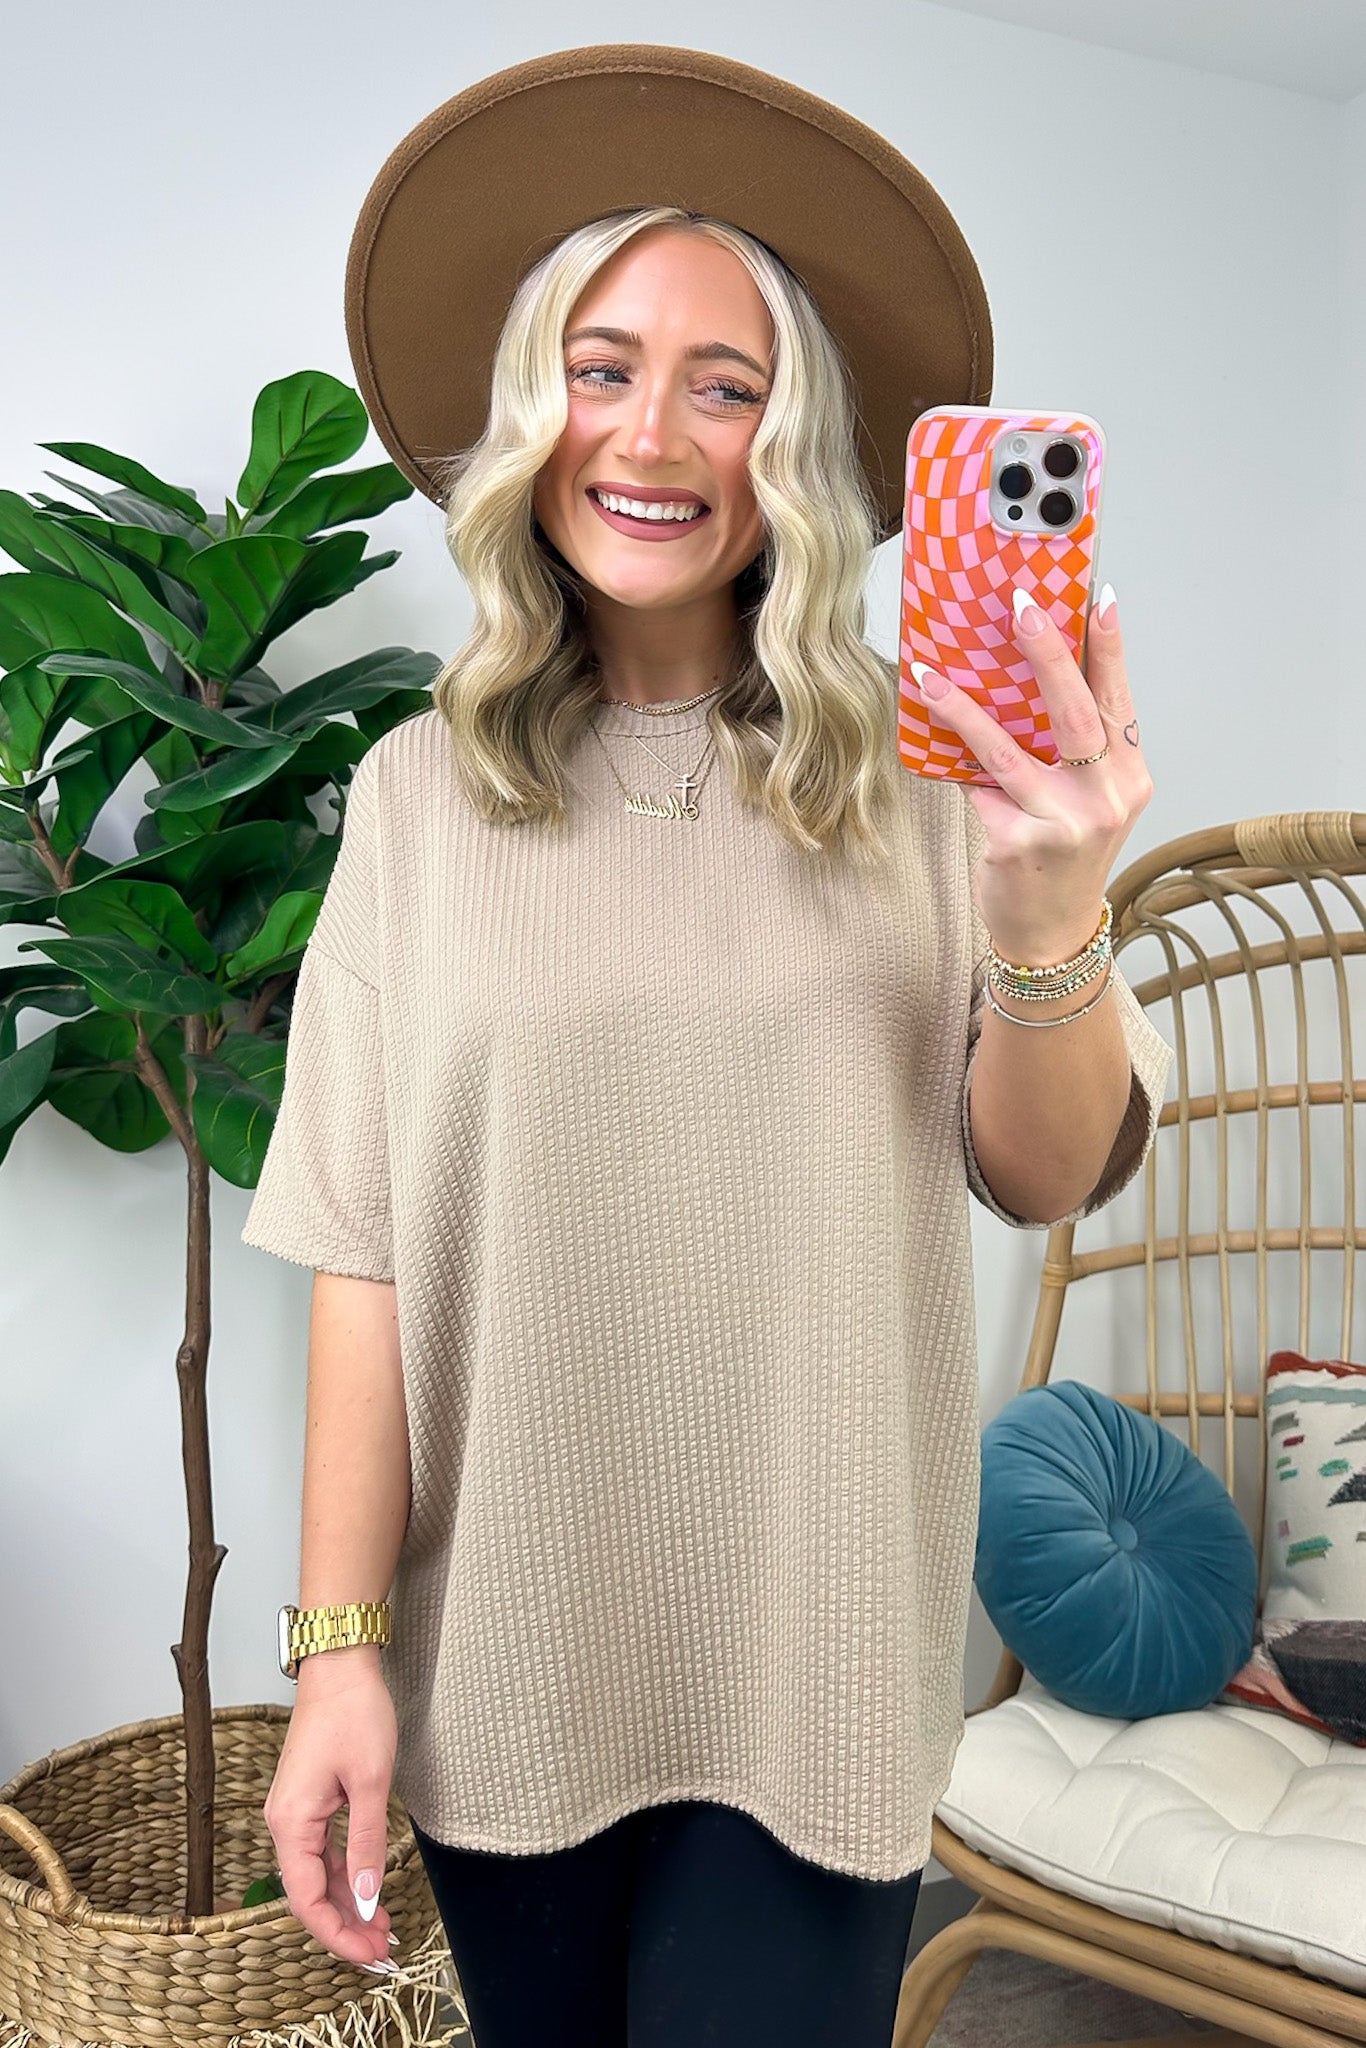  Colettie Jacquard Knit Top - FINAL SALE - Madison and Mallory